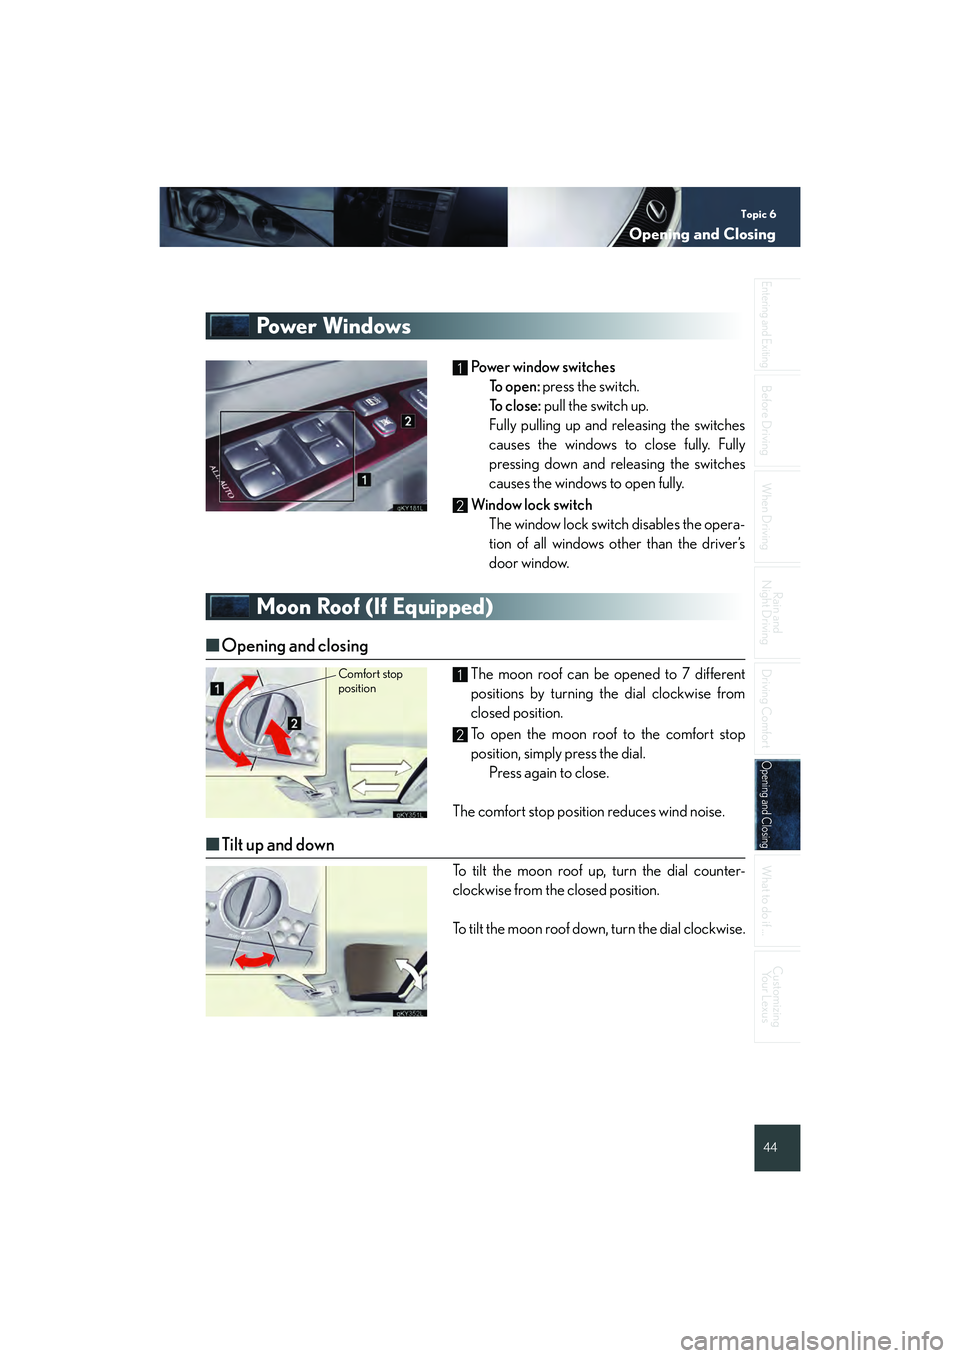 Lexus IS250 2008  Quick Guide Topic 6
Opening and Closing
44
Entering and Exiting
Before DrivingBefore Driving
When Driving
Rain and 
Night Driving
Driving Comfort
Opening and ClosingOpening and Closing
What to do if ...
Customizi